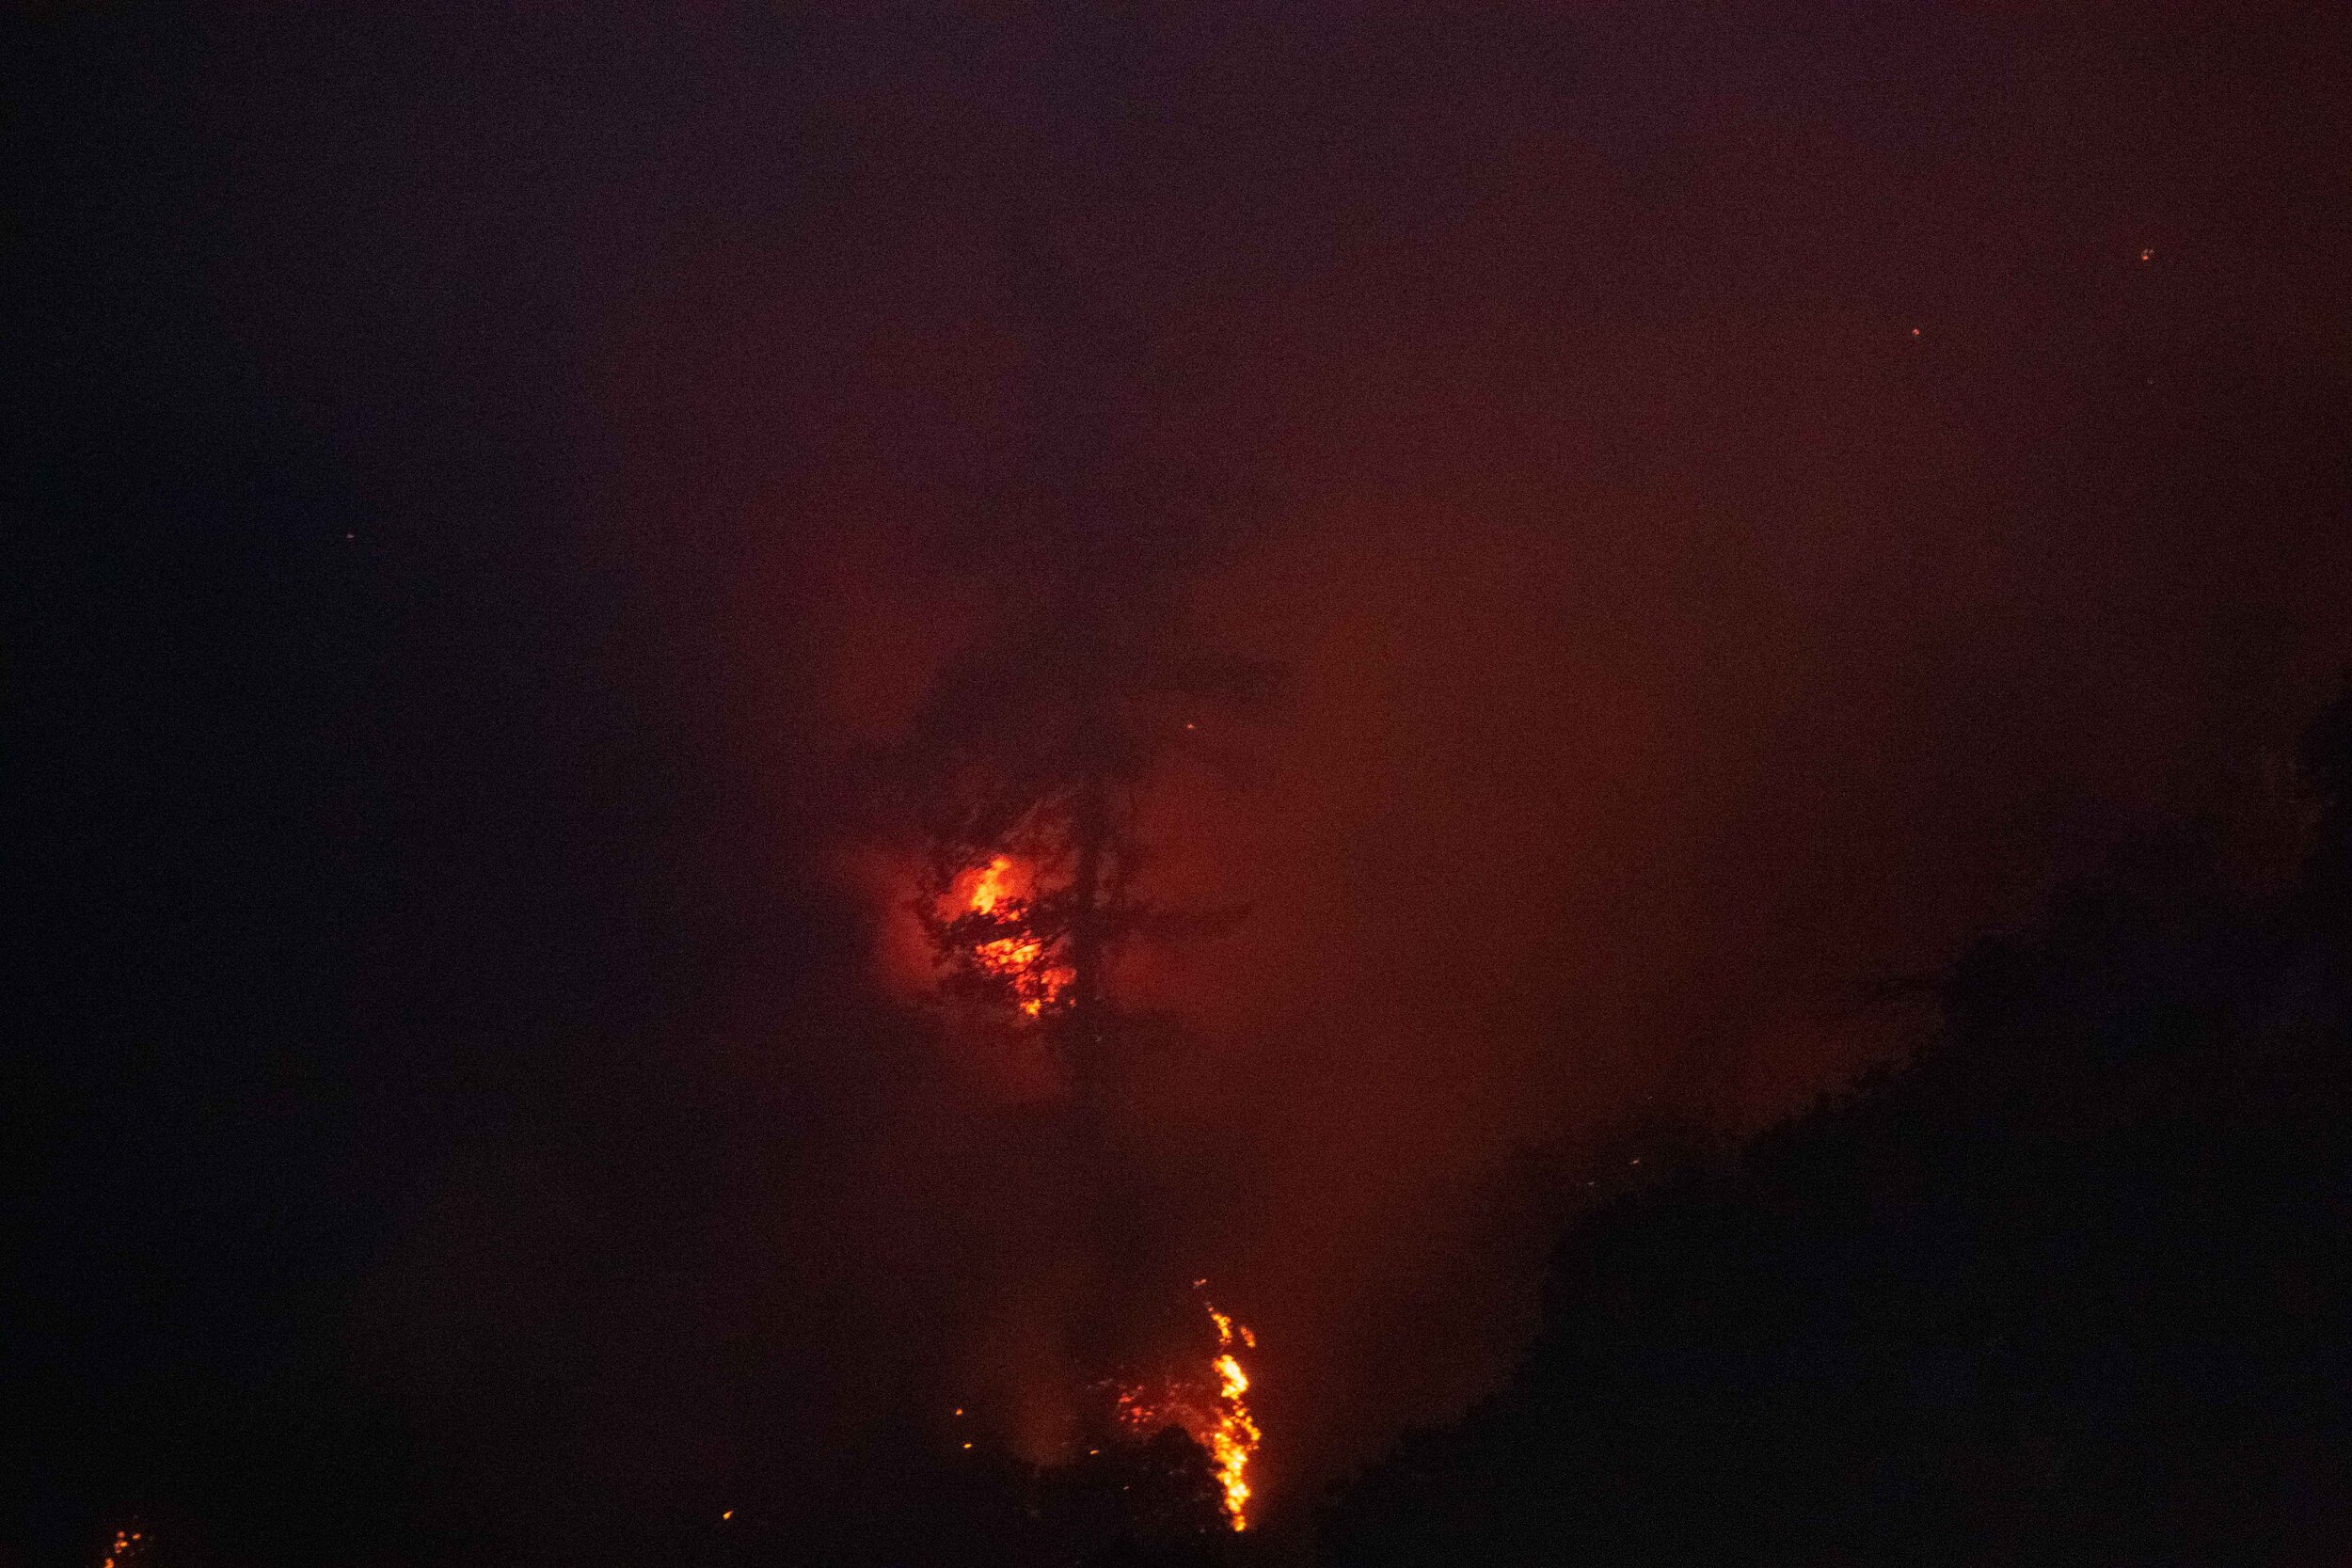  A tree dimly illuminated by a portion of the Saddlerige fire just off interstate 5 near Newhall Calif. on Friday, Oct. 11 2019. (Conner Savage/The Corsair) 